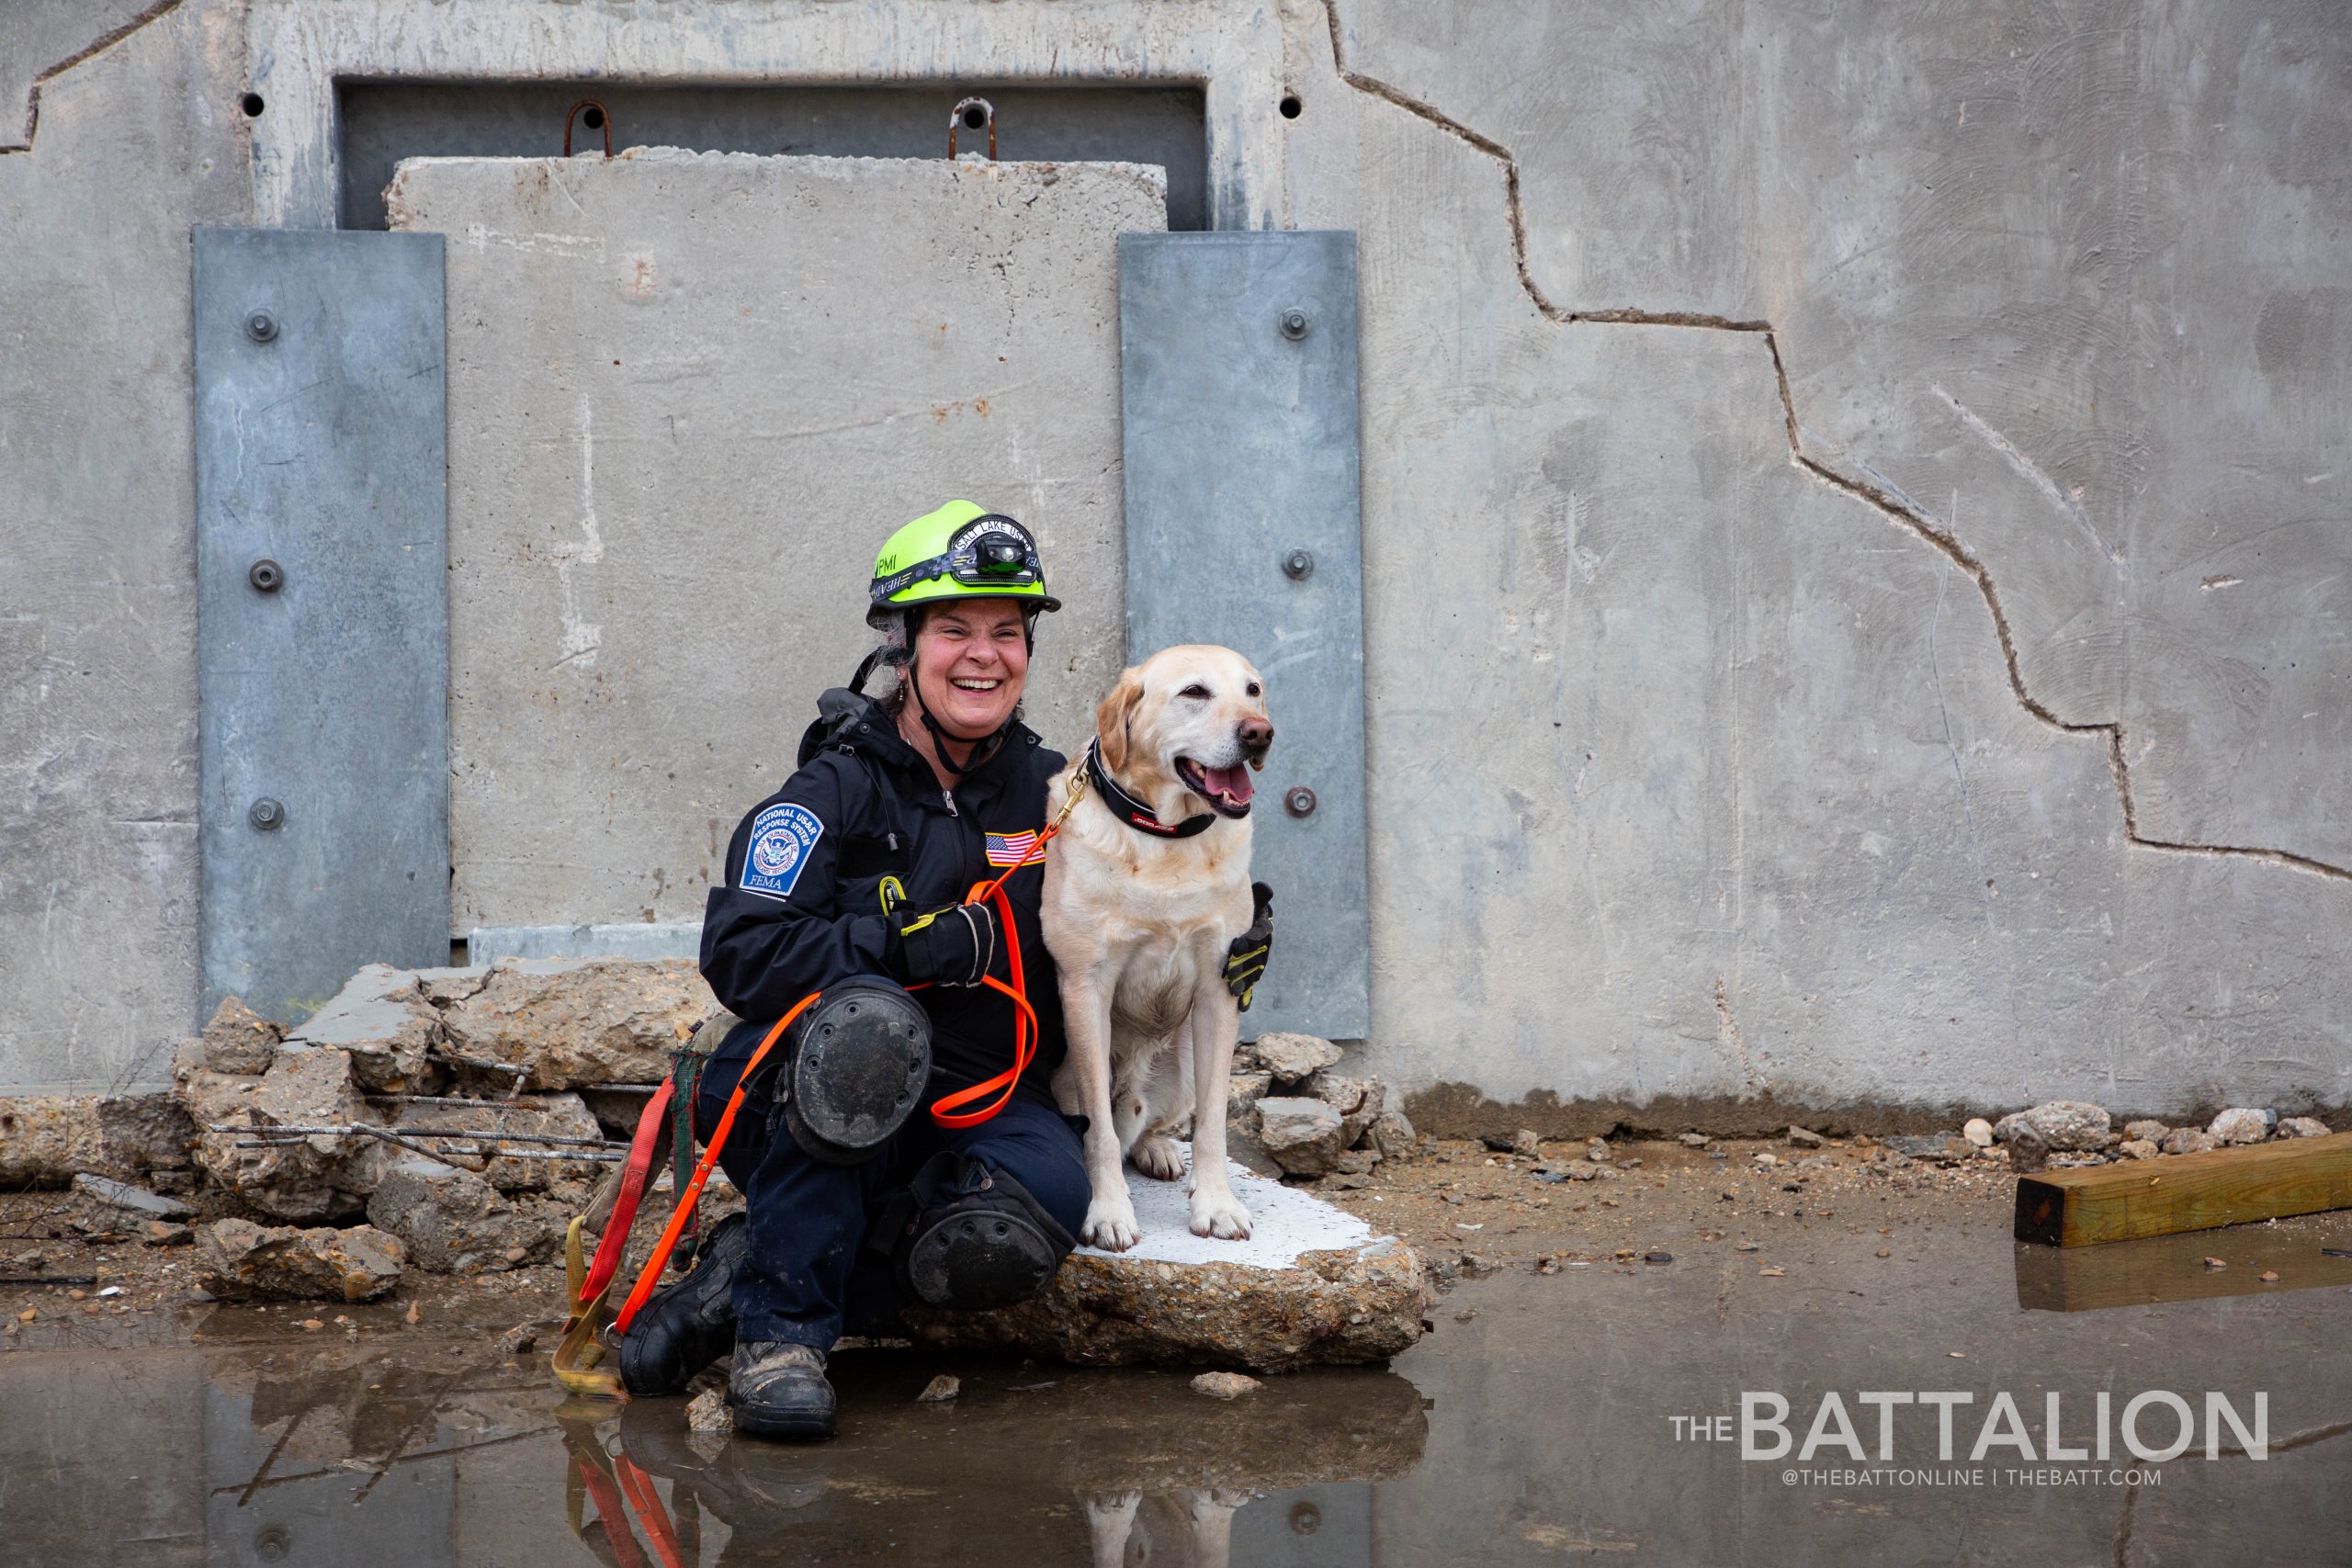 GALLERY%3A+FEMA+Canine+Training+at+Disaster+City